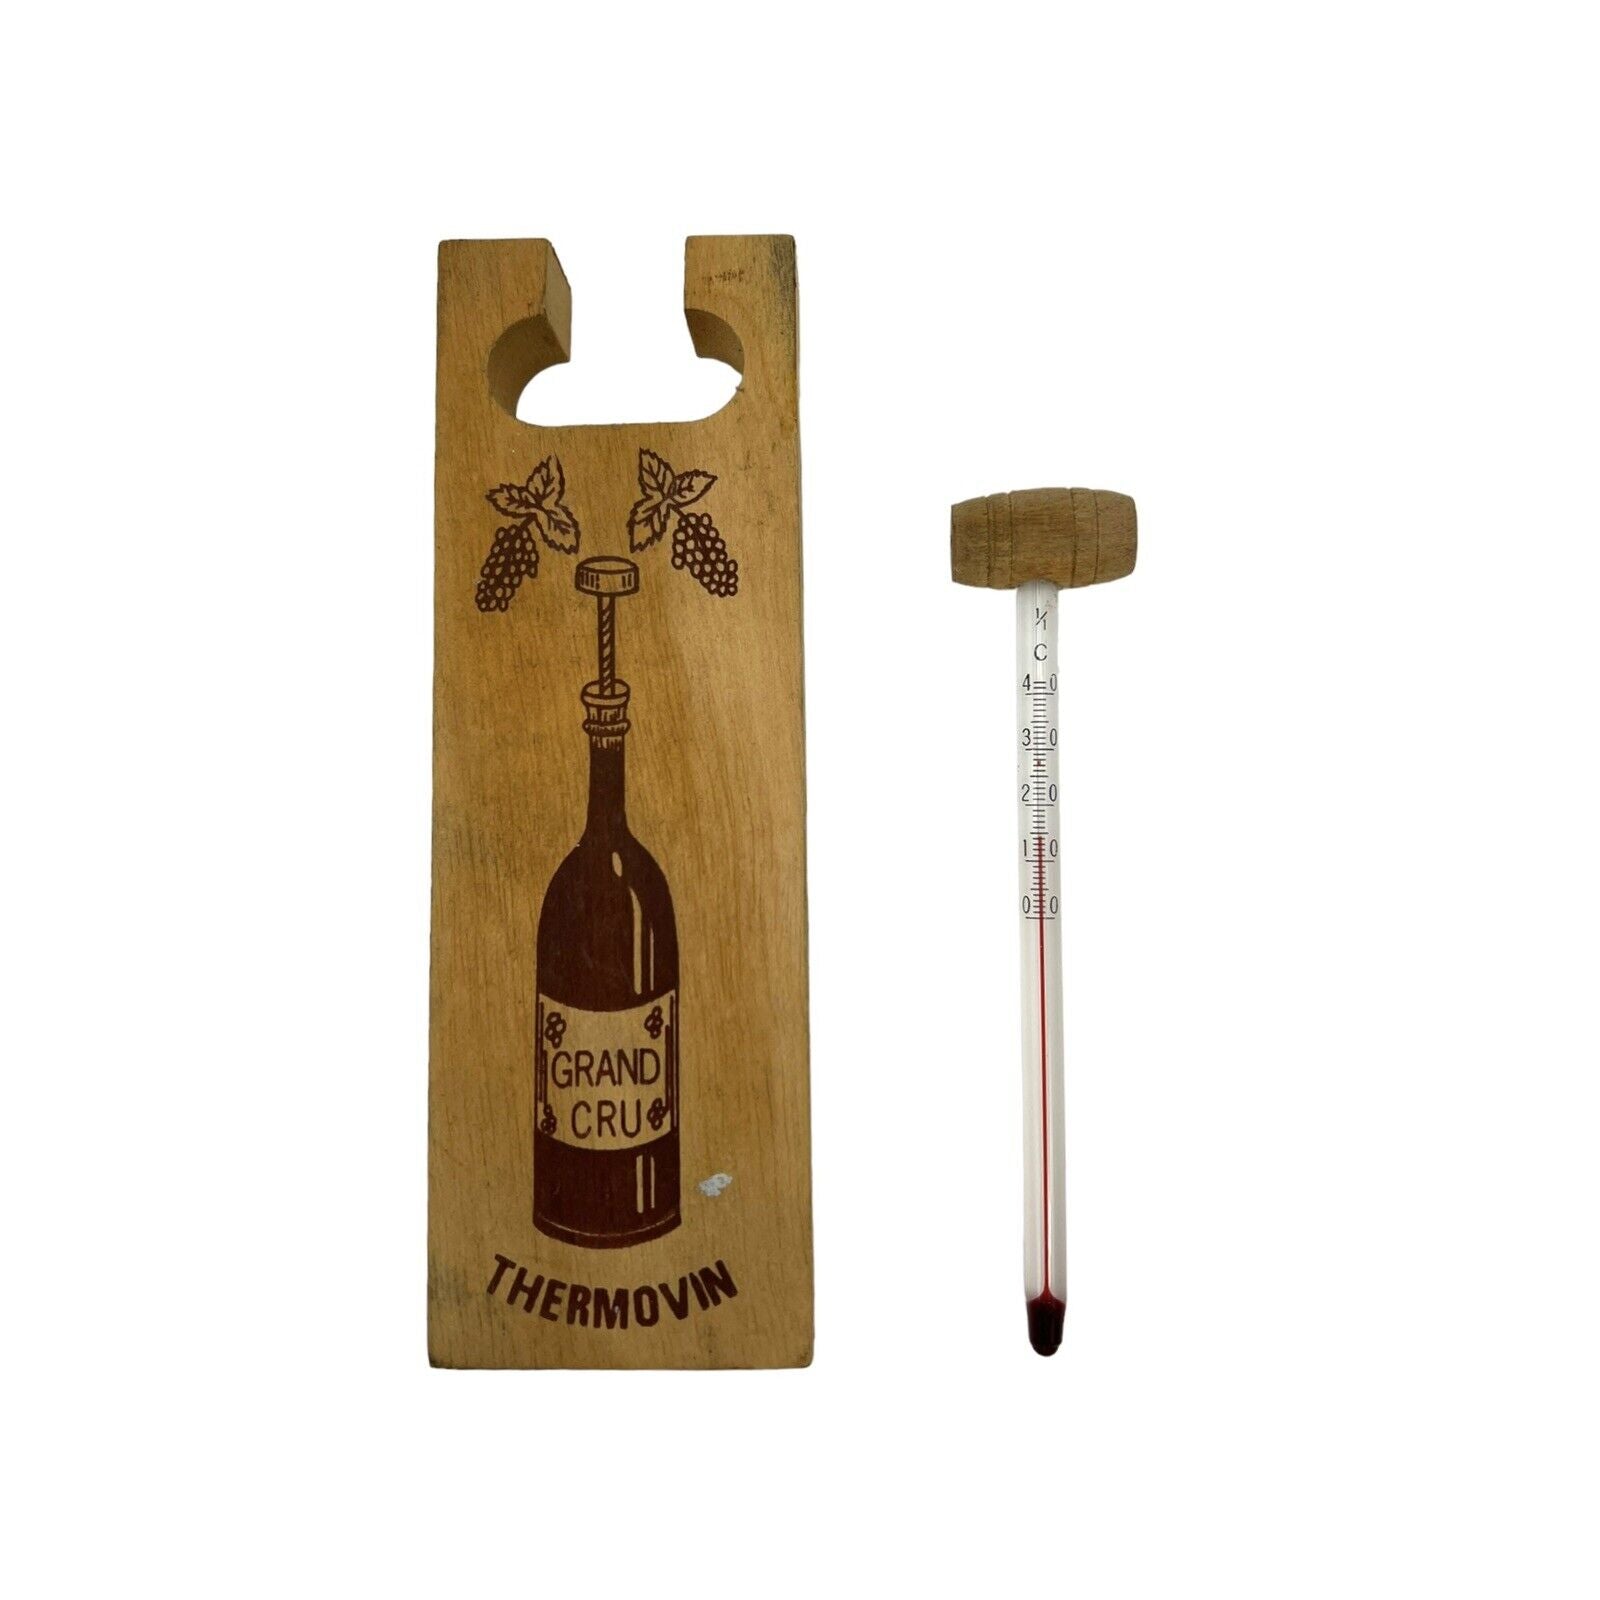 image 2 French vintage style wine thermometer sold by All Things French Store